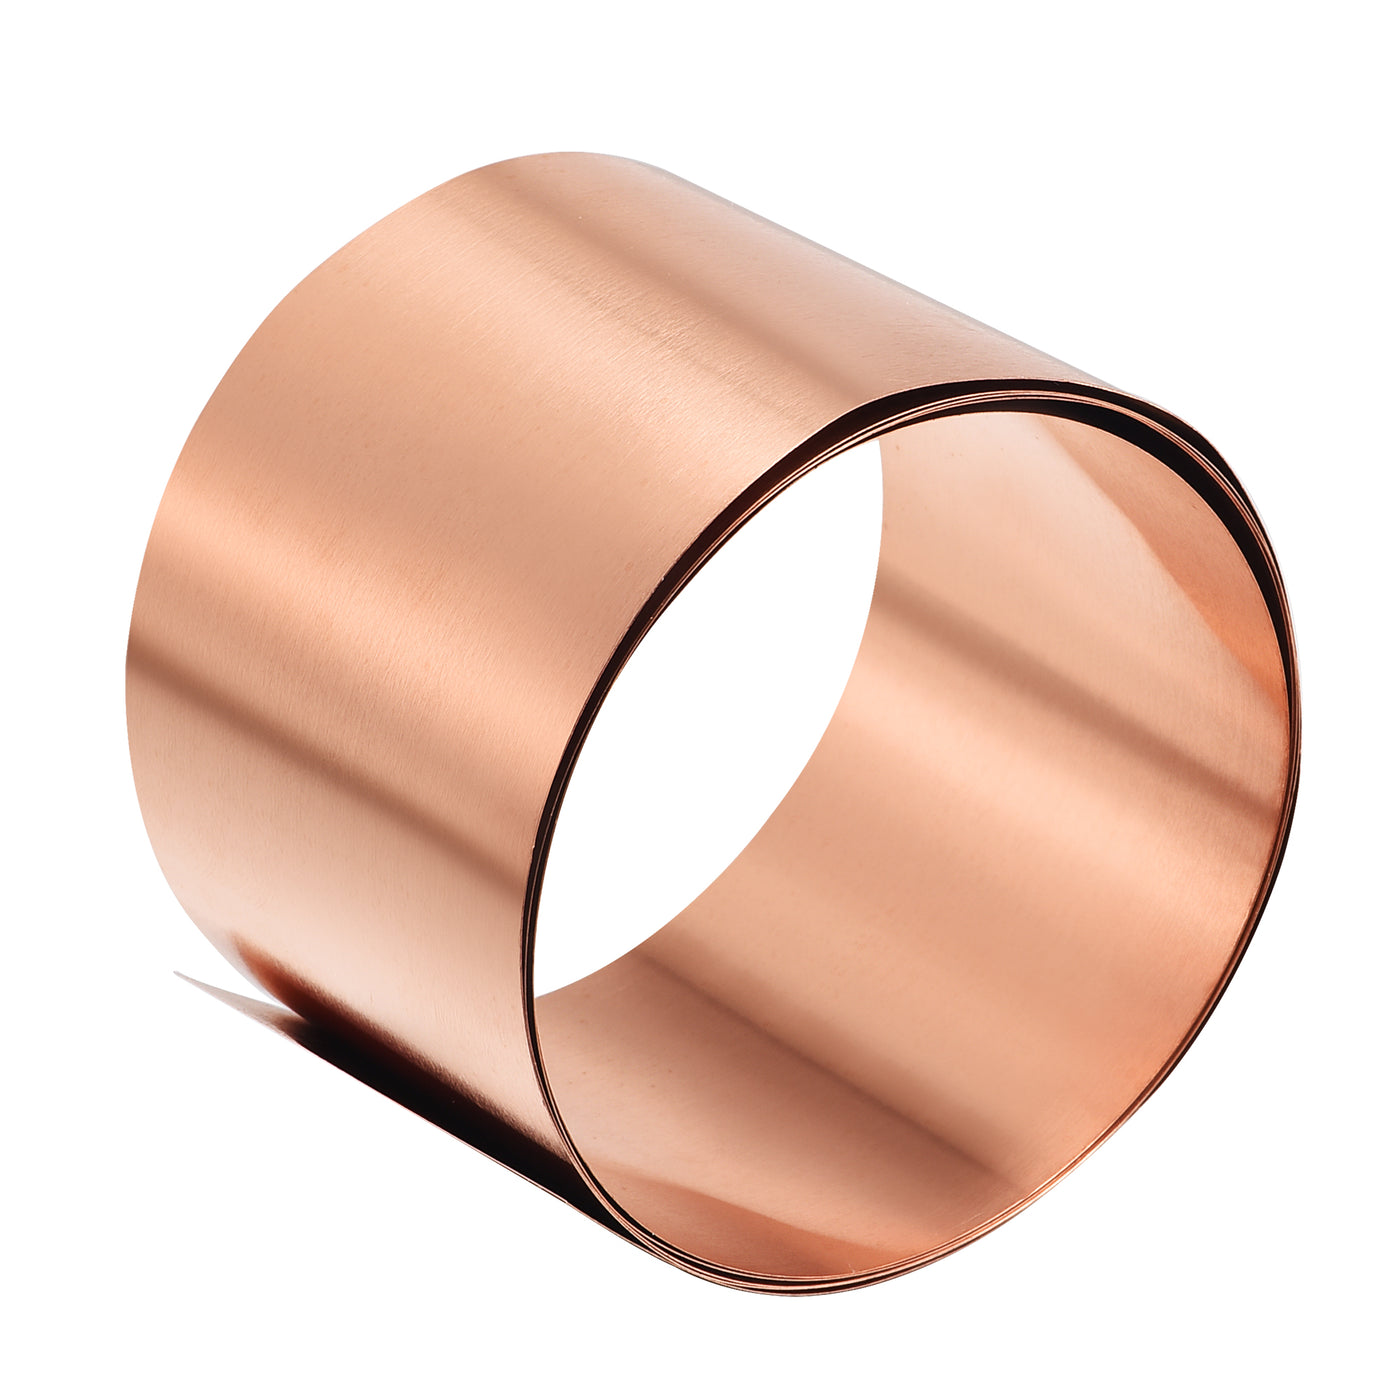 uxcell Uxcell Copper Sheet Roll, Metal Foil Plate